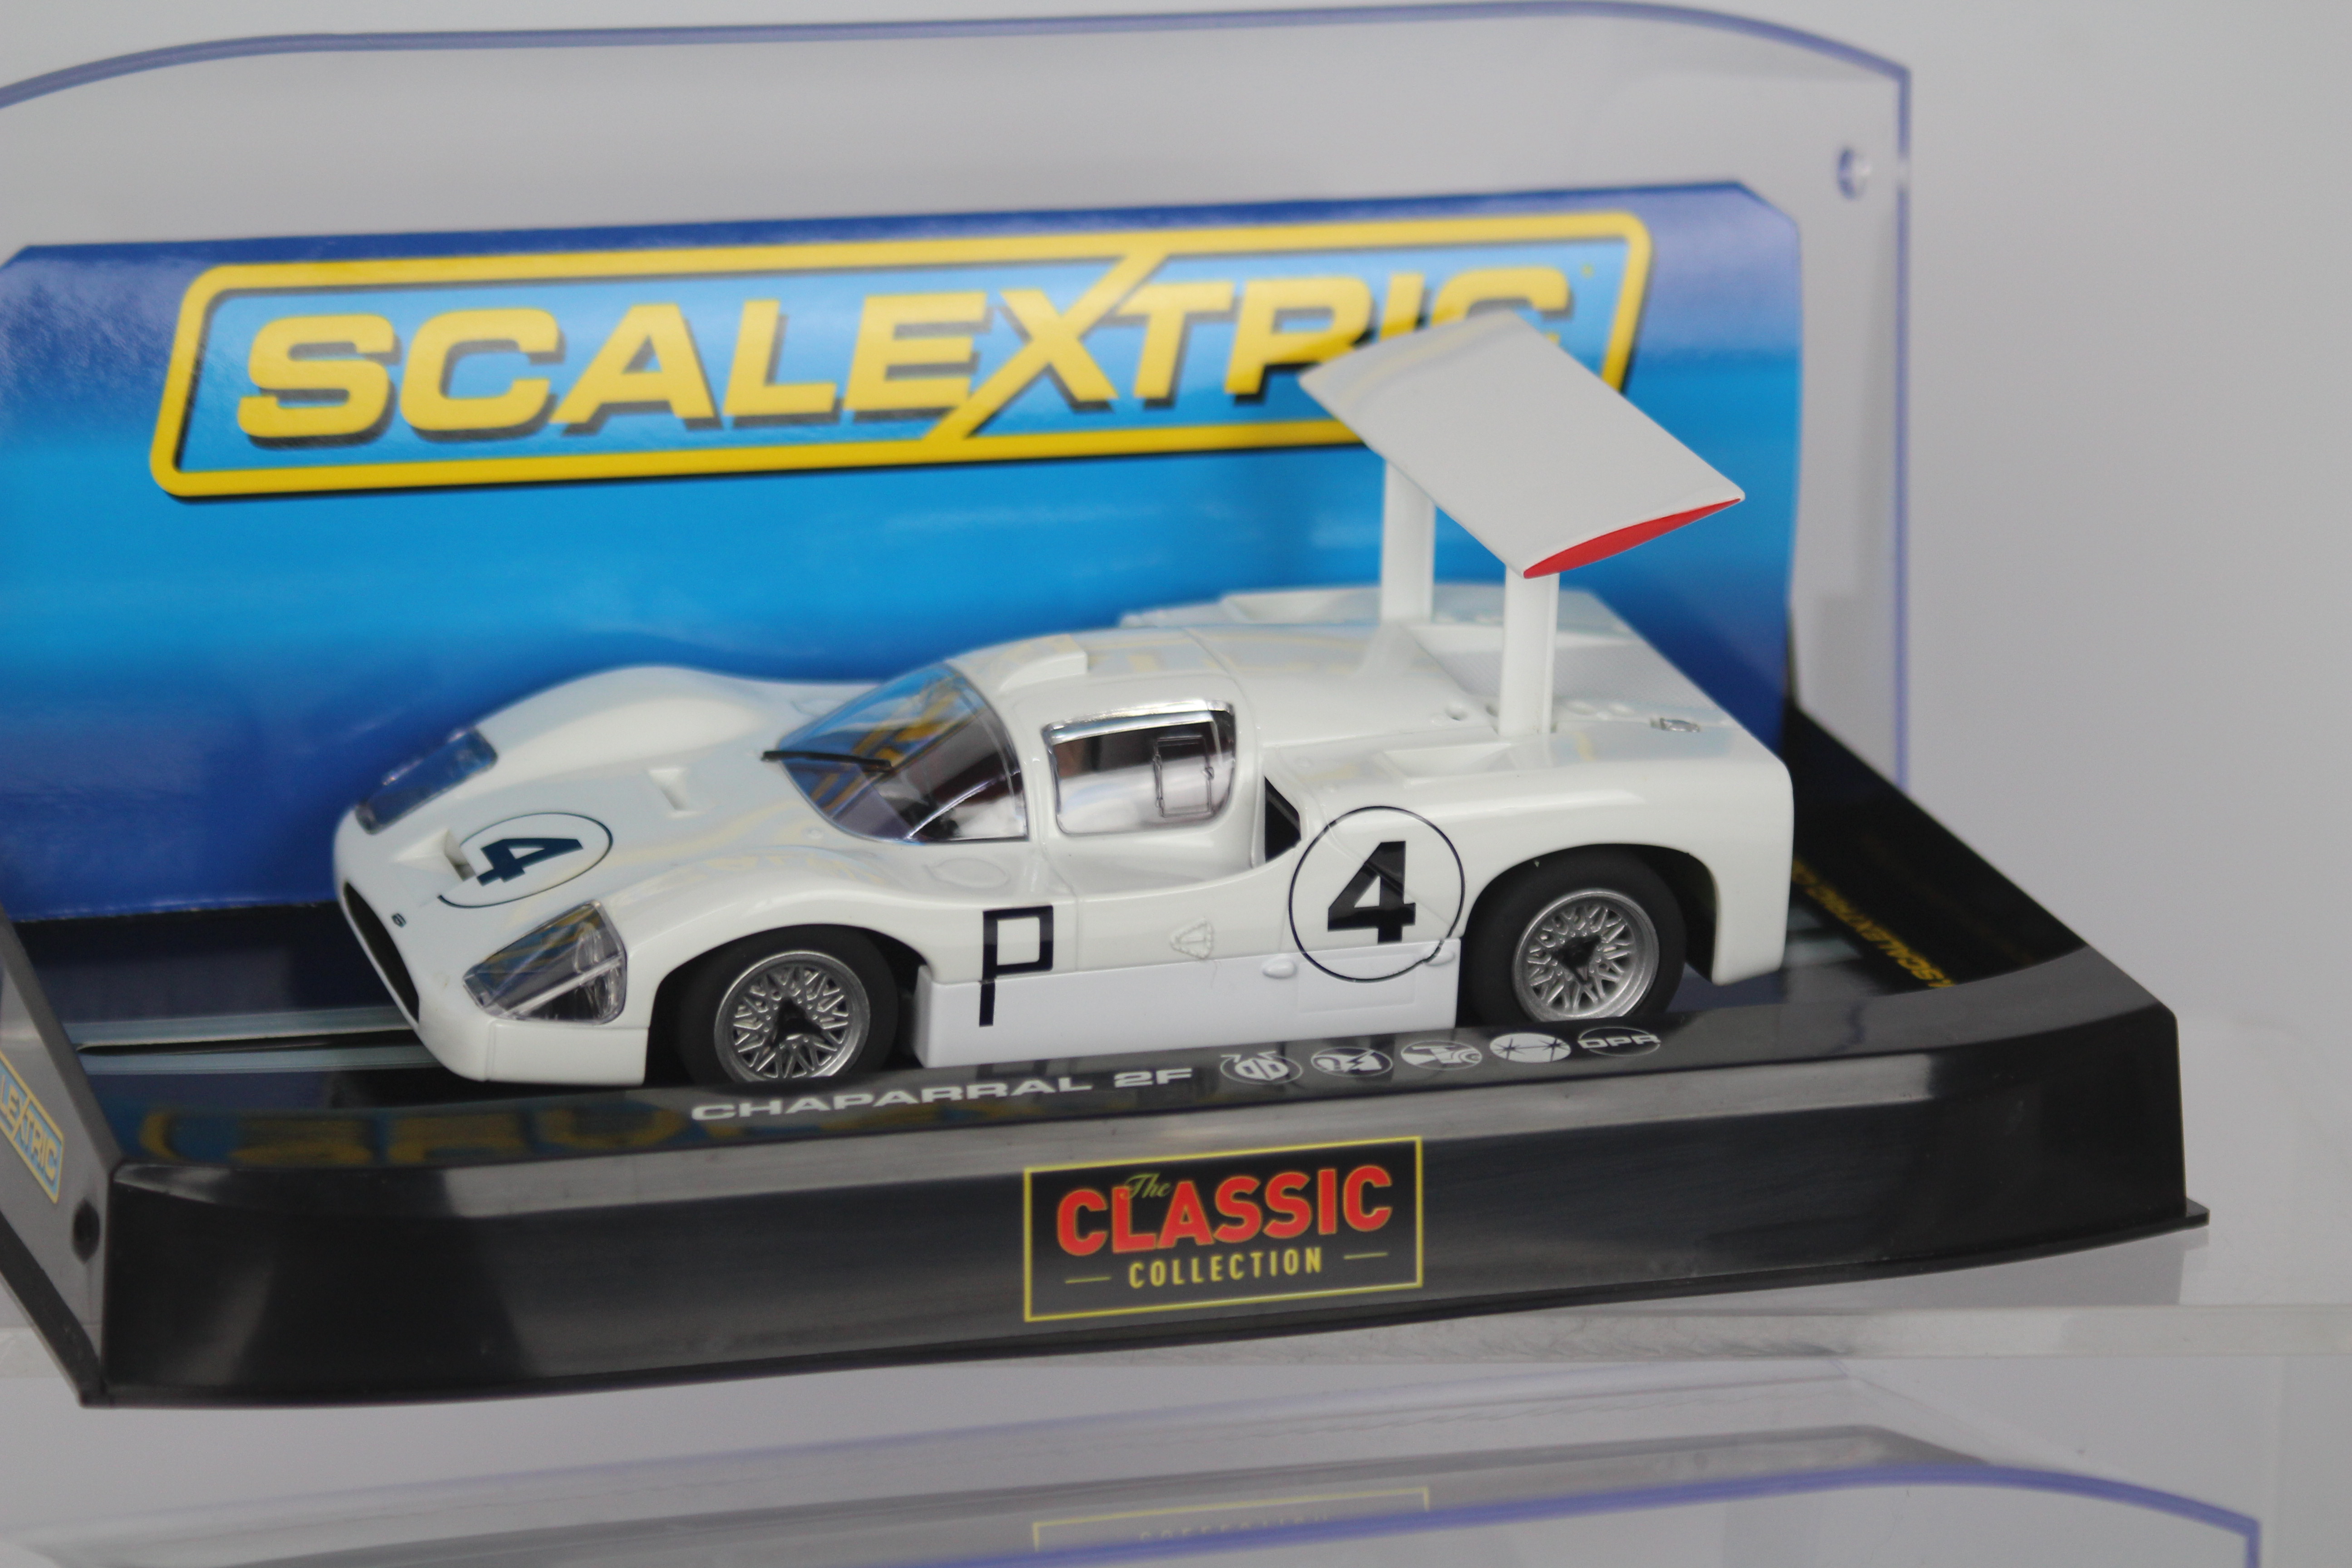 Scalextric - Two boxed Scalextric C2916 Chaparral 2F RN4 1:32 scale slot cars from the Scalextric - Image 3 of 3